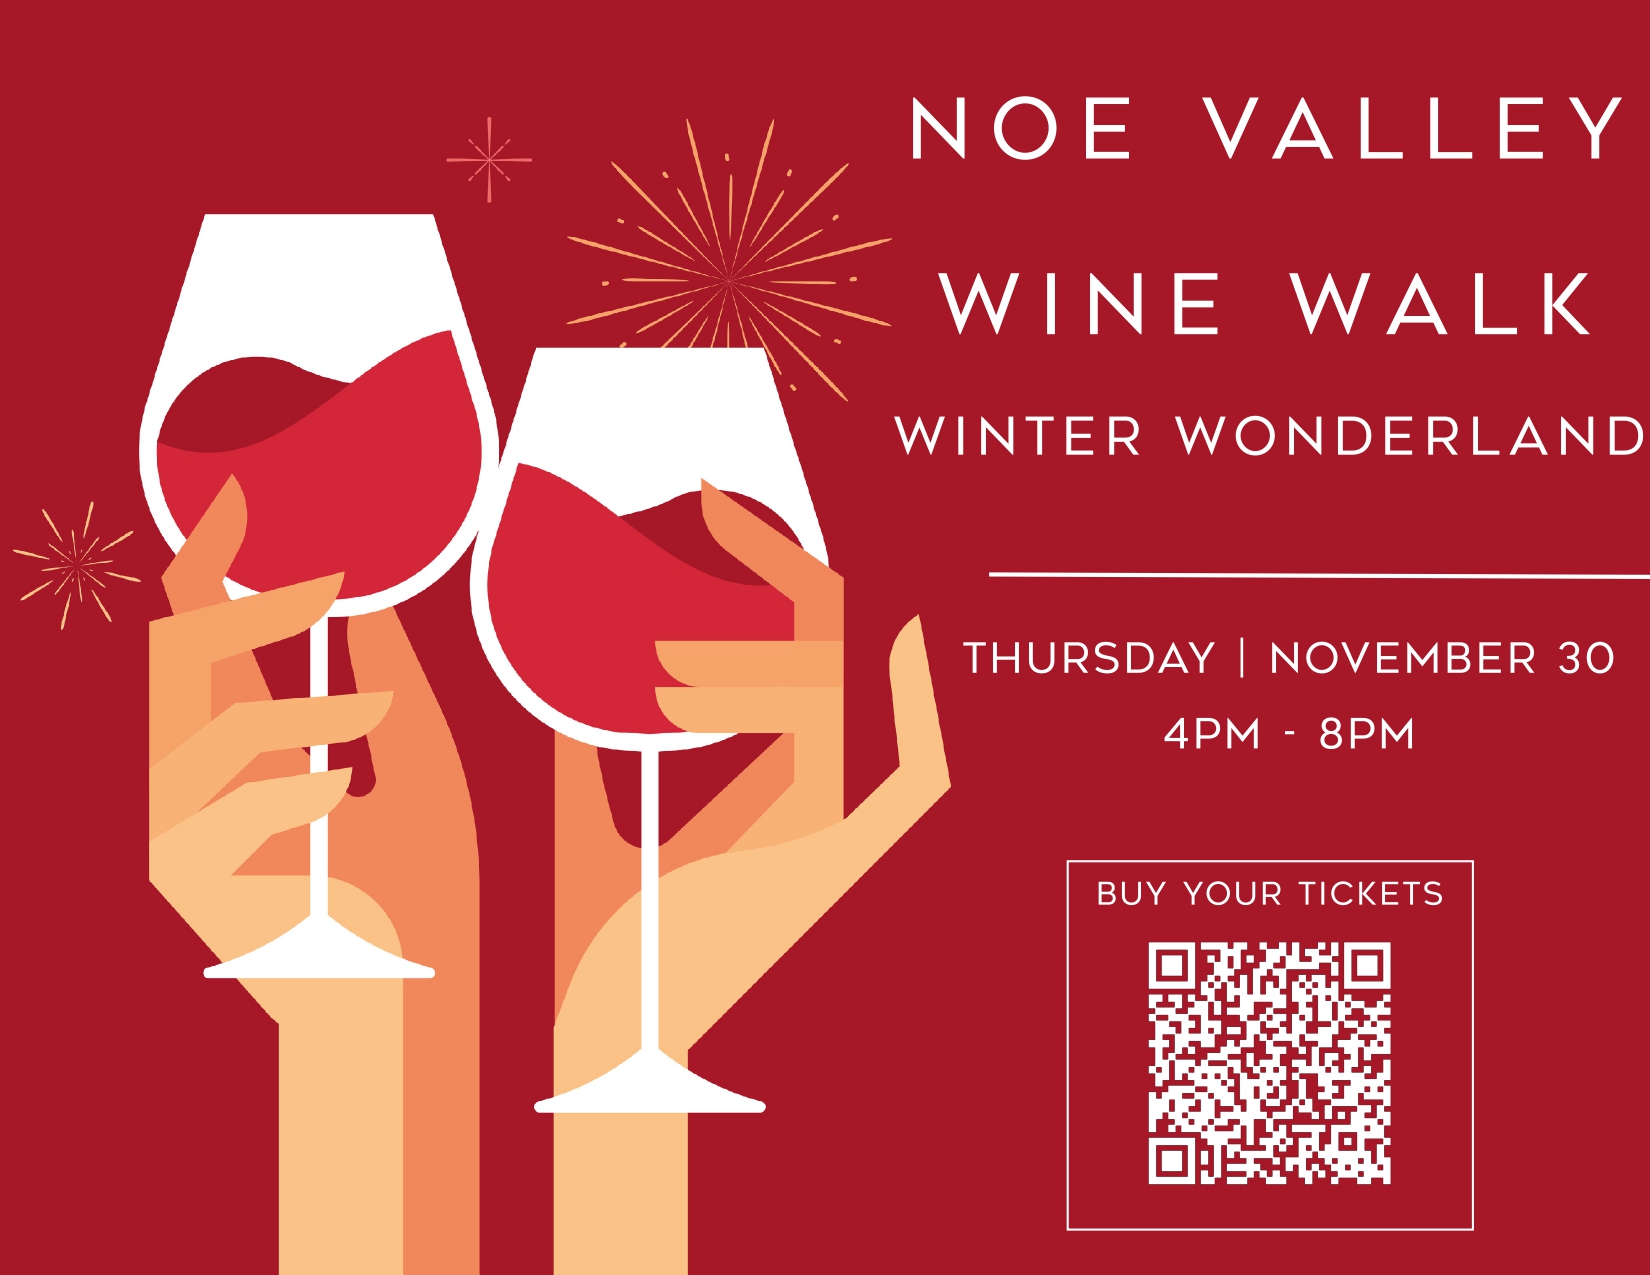 Join us for the 2023 Noe Valley Wine Walk!